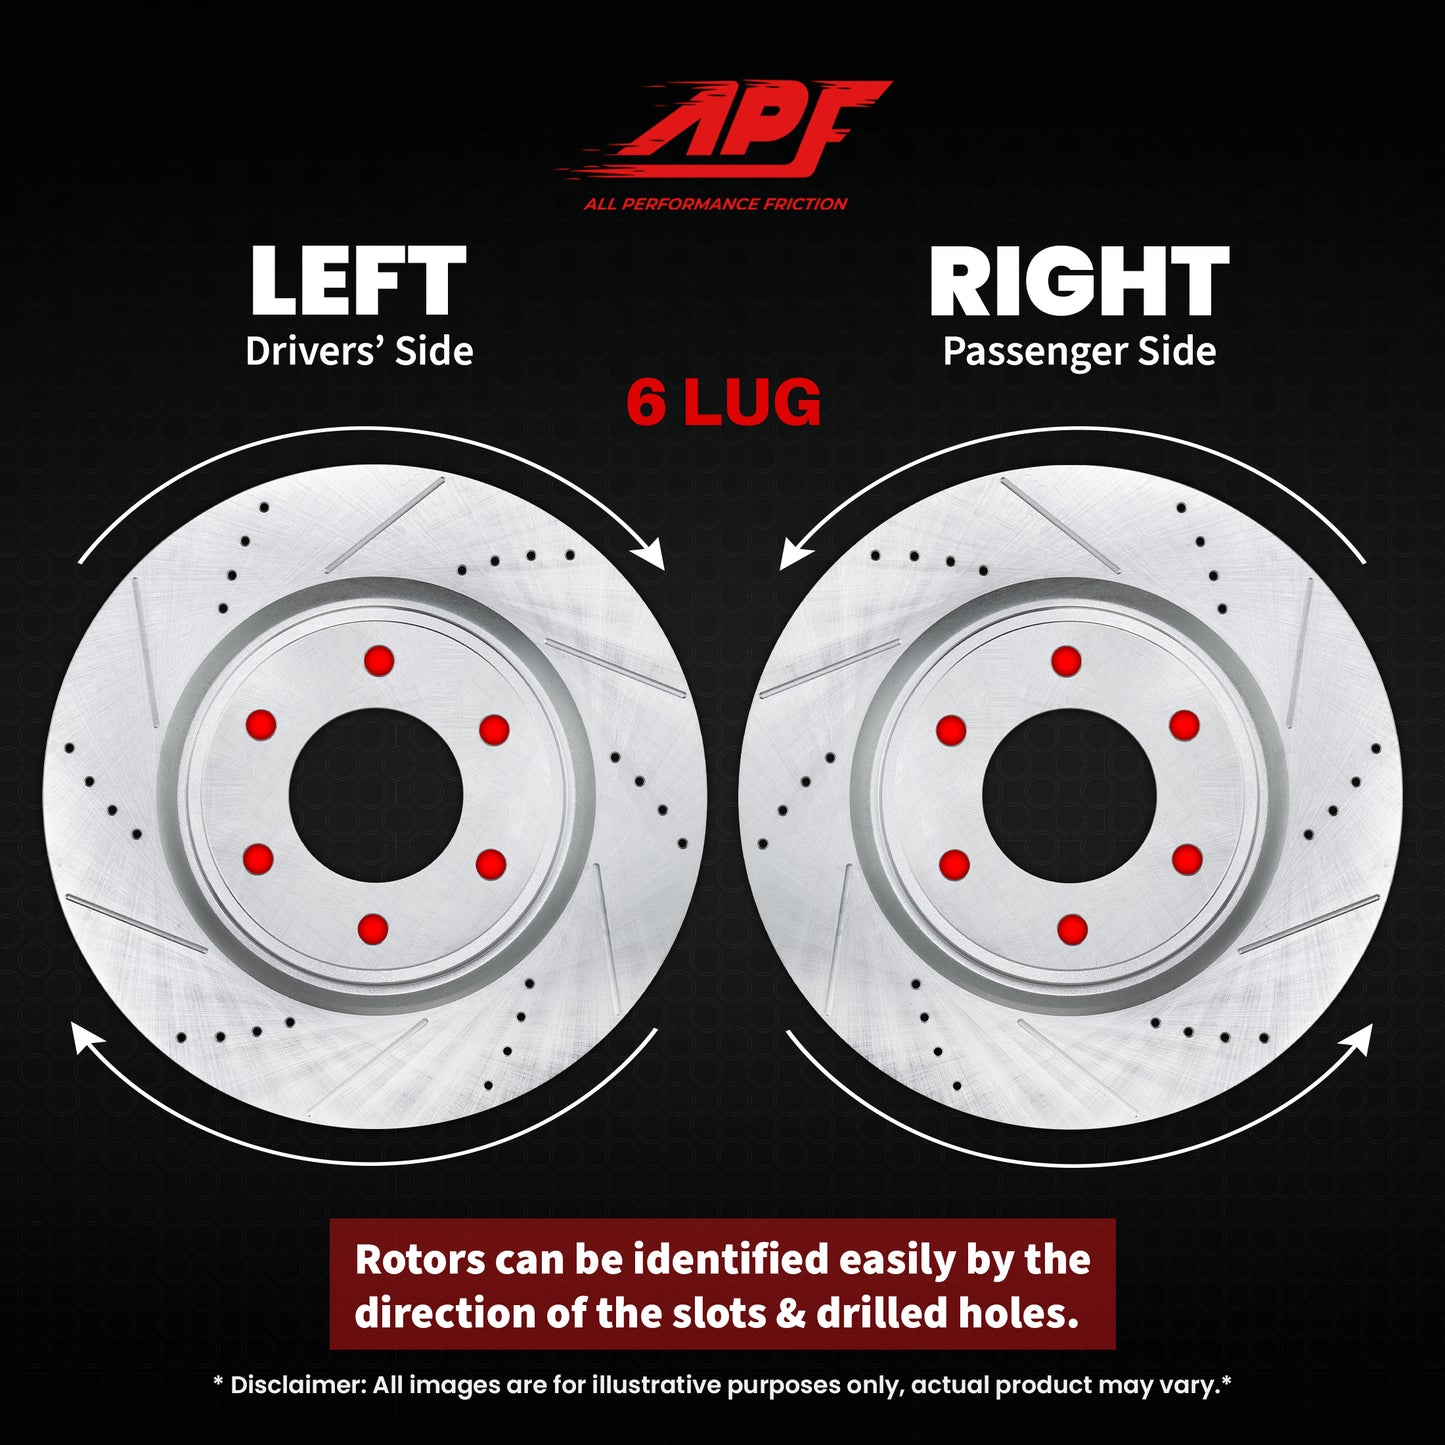 APF All Performance Friction Rear Rotors and Pads Half Kit compatible with Nissan Pathfinder Armada 2004-2004 Zinc Drilled Slotted Rotors with Ceramic Carbon Fiber Brake Pads | $152.59